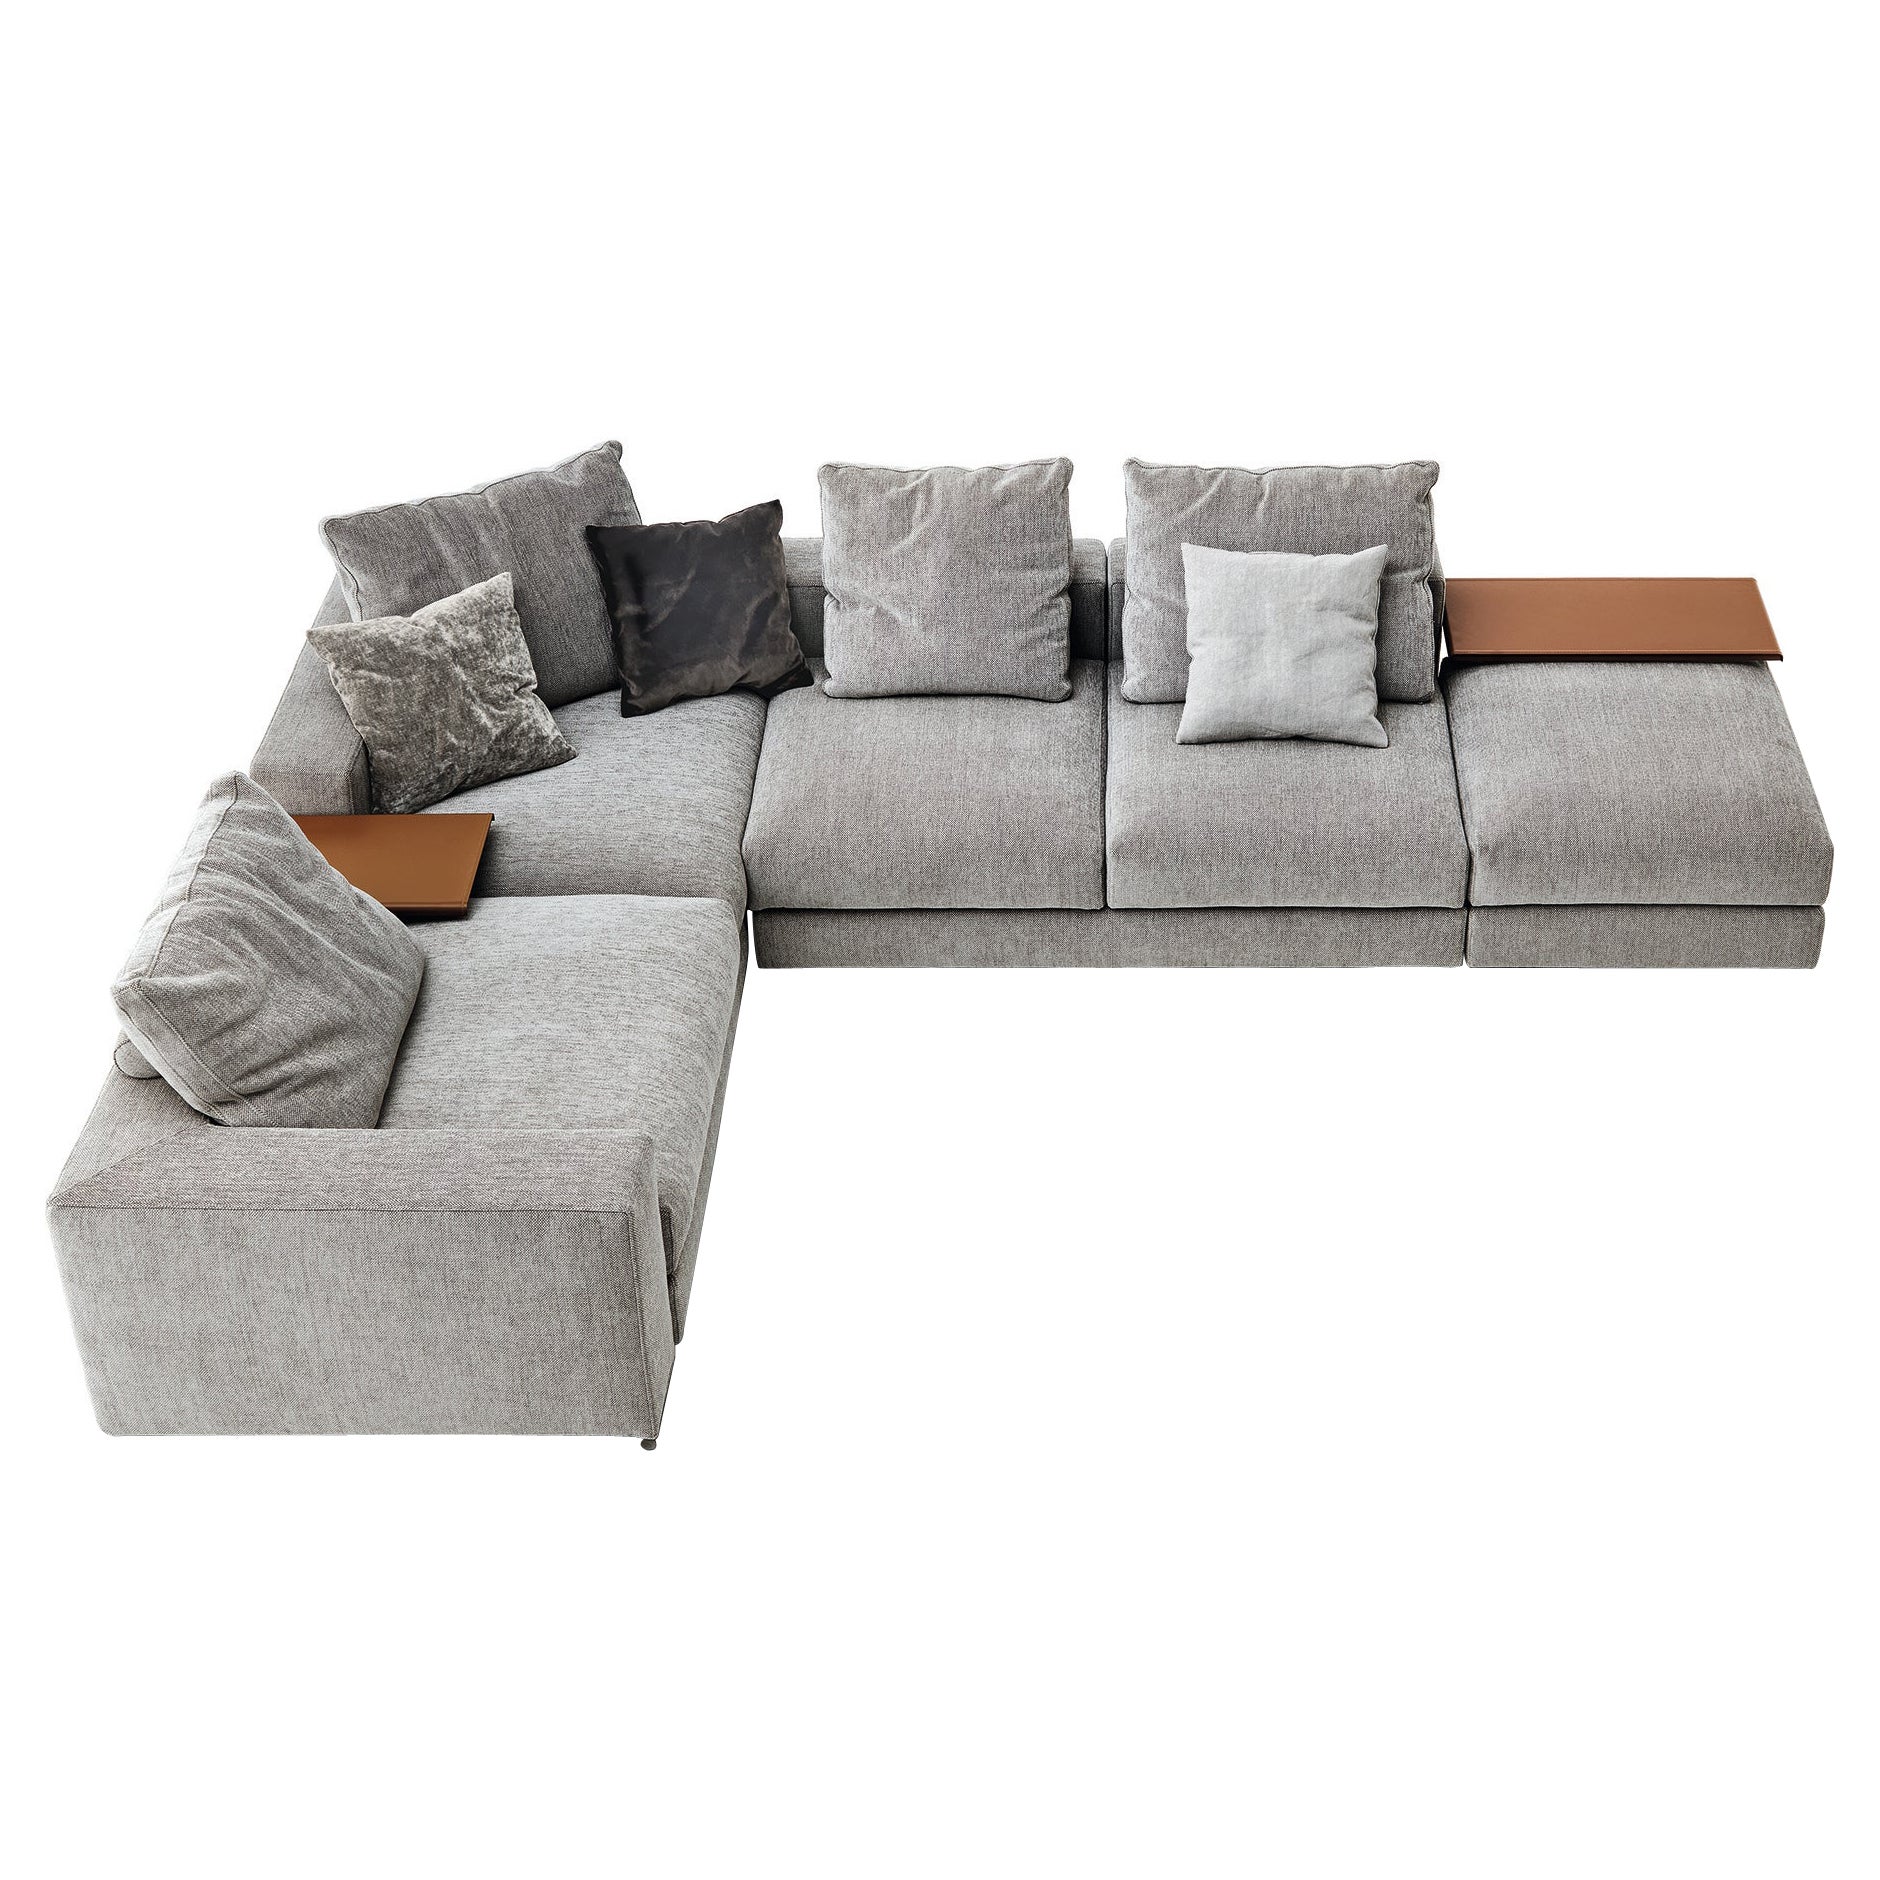 Ananta Class 15 Medium Sofa in Lusso Upholstery & Black Nickel by Sergio Bicego For Sale